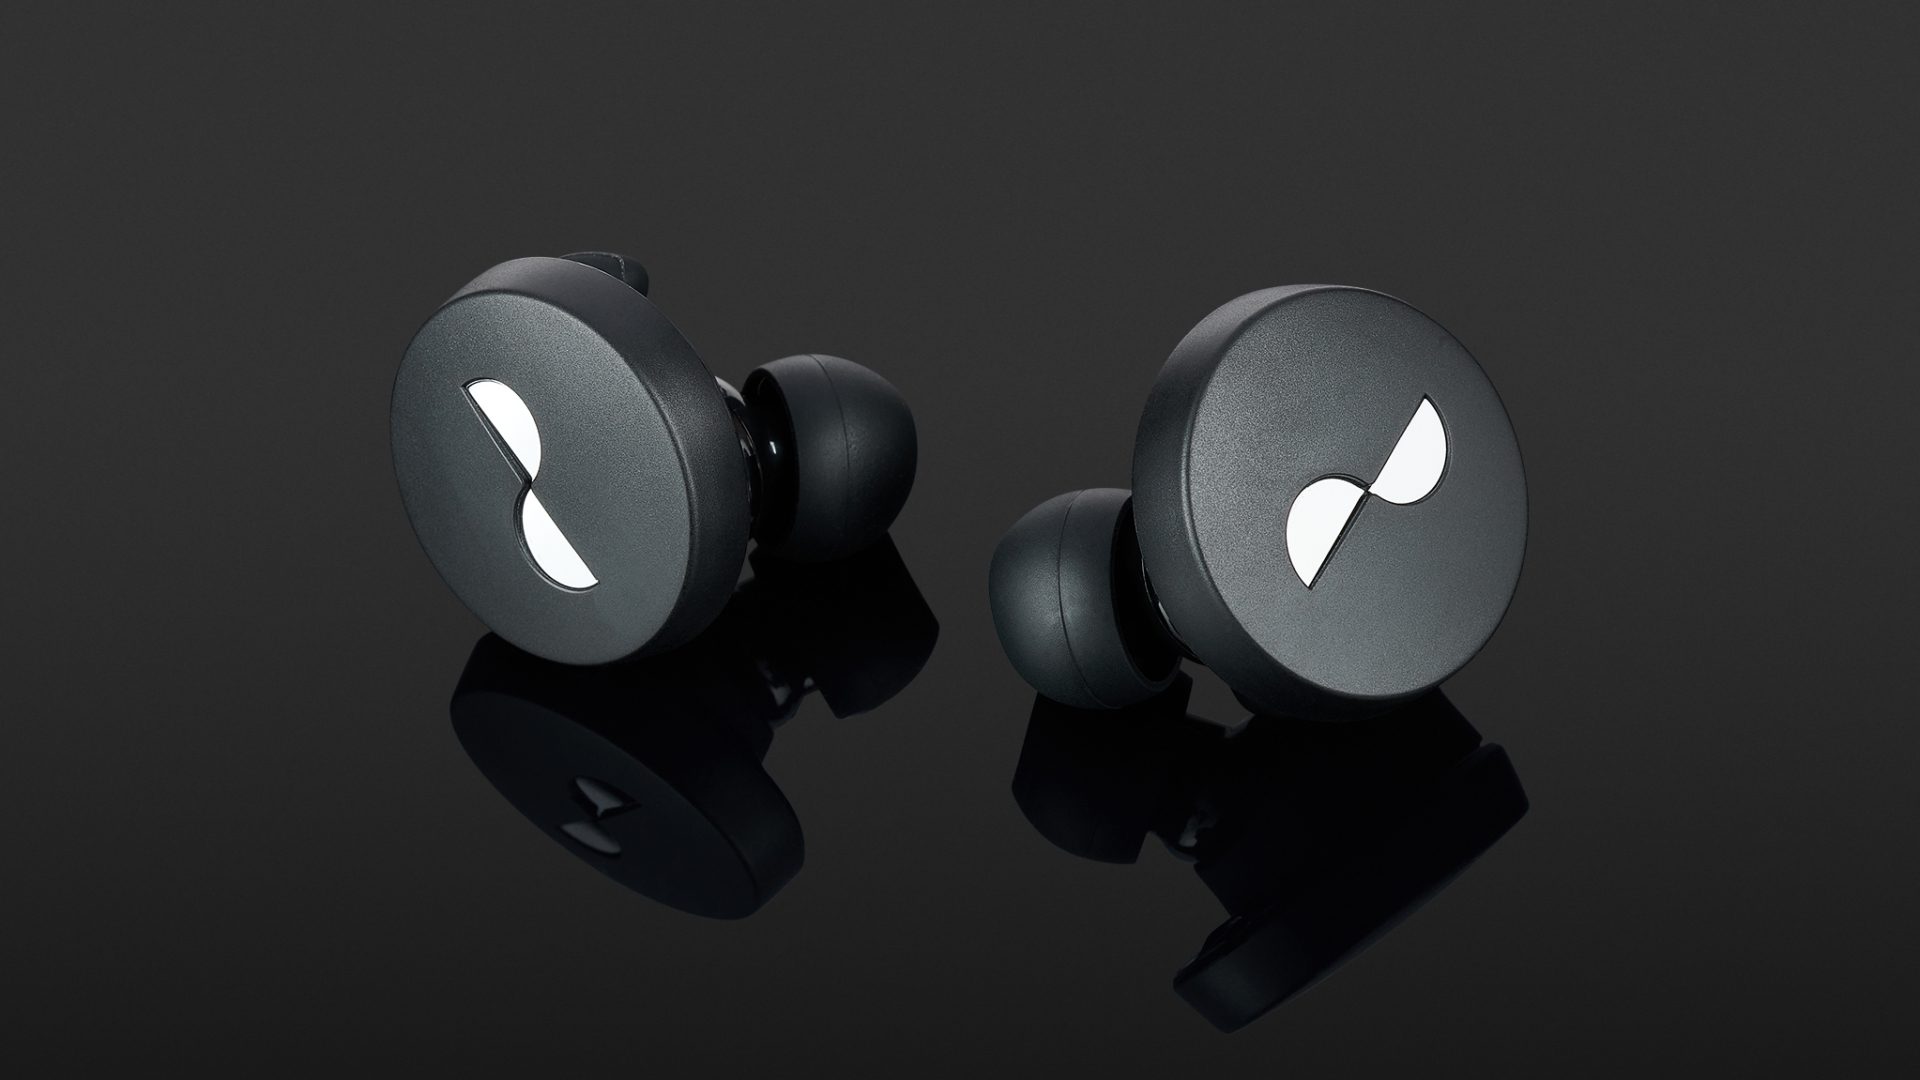 The NuraTrue Pro are the first wireless earphones to feature aptX Lossless streaming